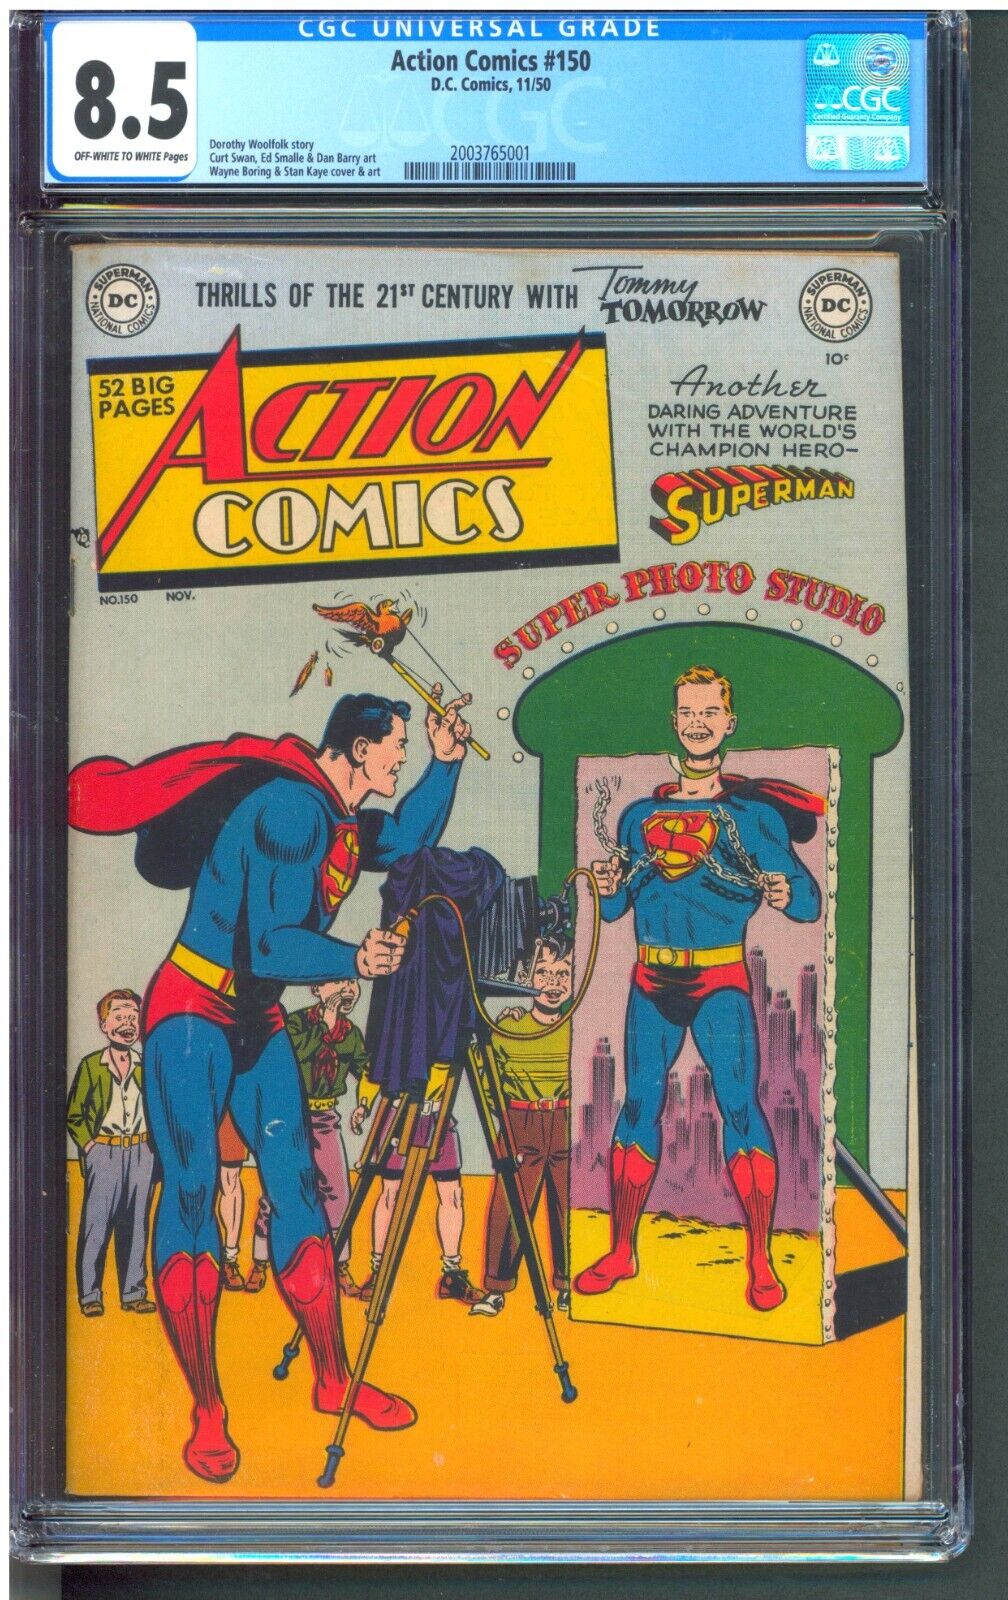 ACTION COMICS #150 CGC 8.5 VF+  NICE OW/W PAGES TOUGH TIME PERIOD FOR HI GRADE